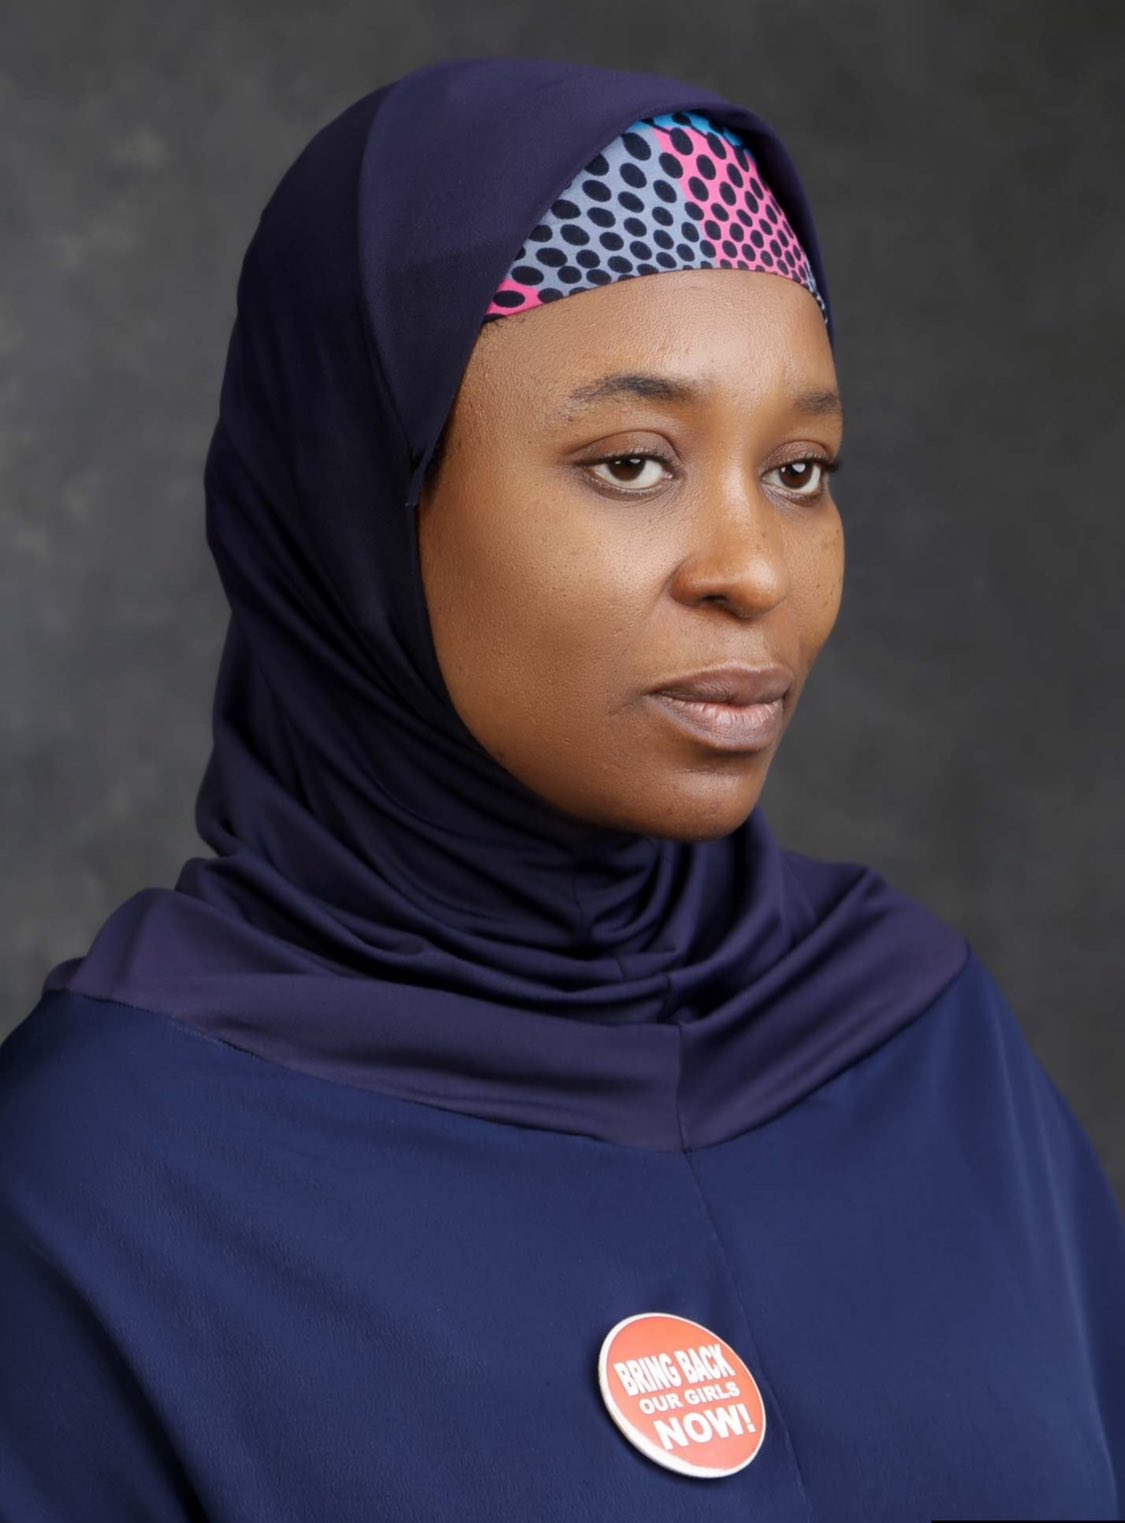 If you say Nigerian politics is dirty, roll up the sleeves let’s get it clean - Aisha Yesufu